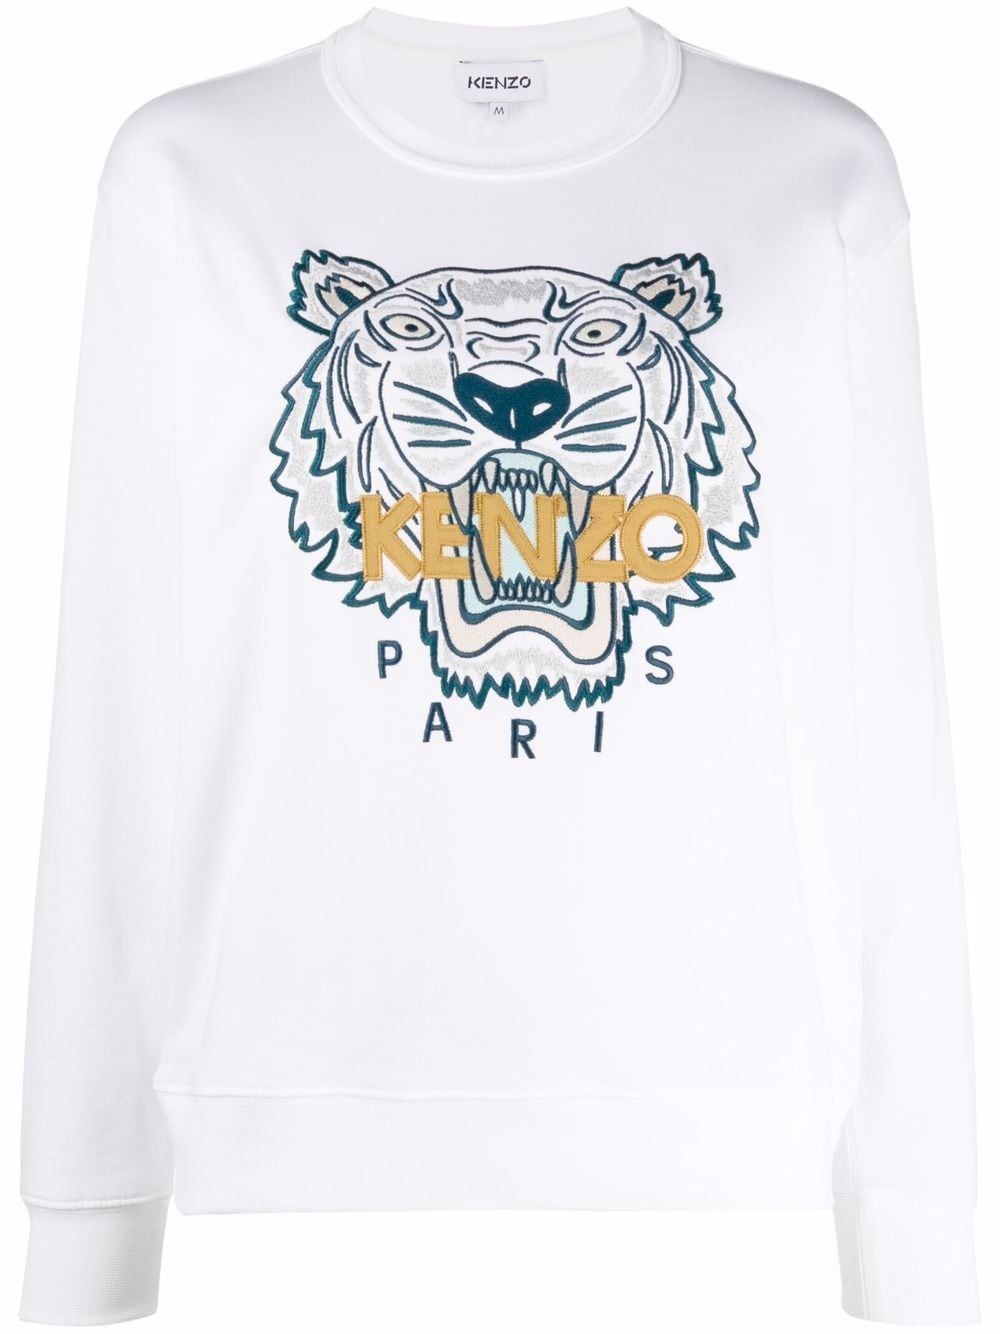 Kenzo Tiger Sweater Flash Sales, 51% OFF | www.ilpungolo.org